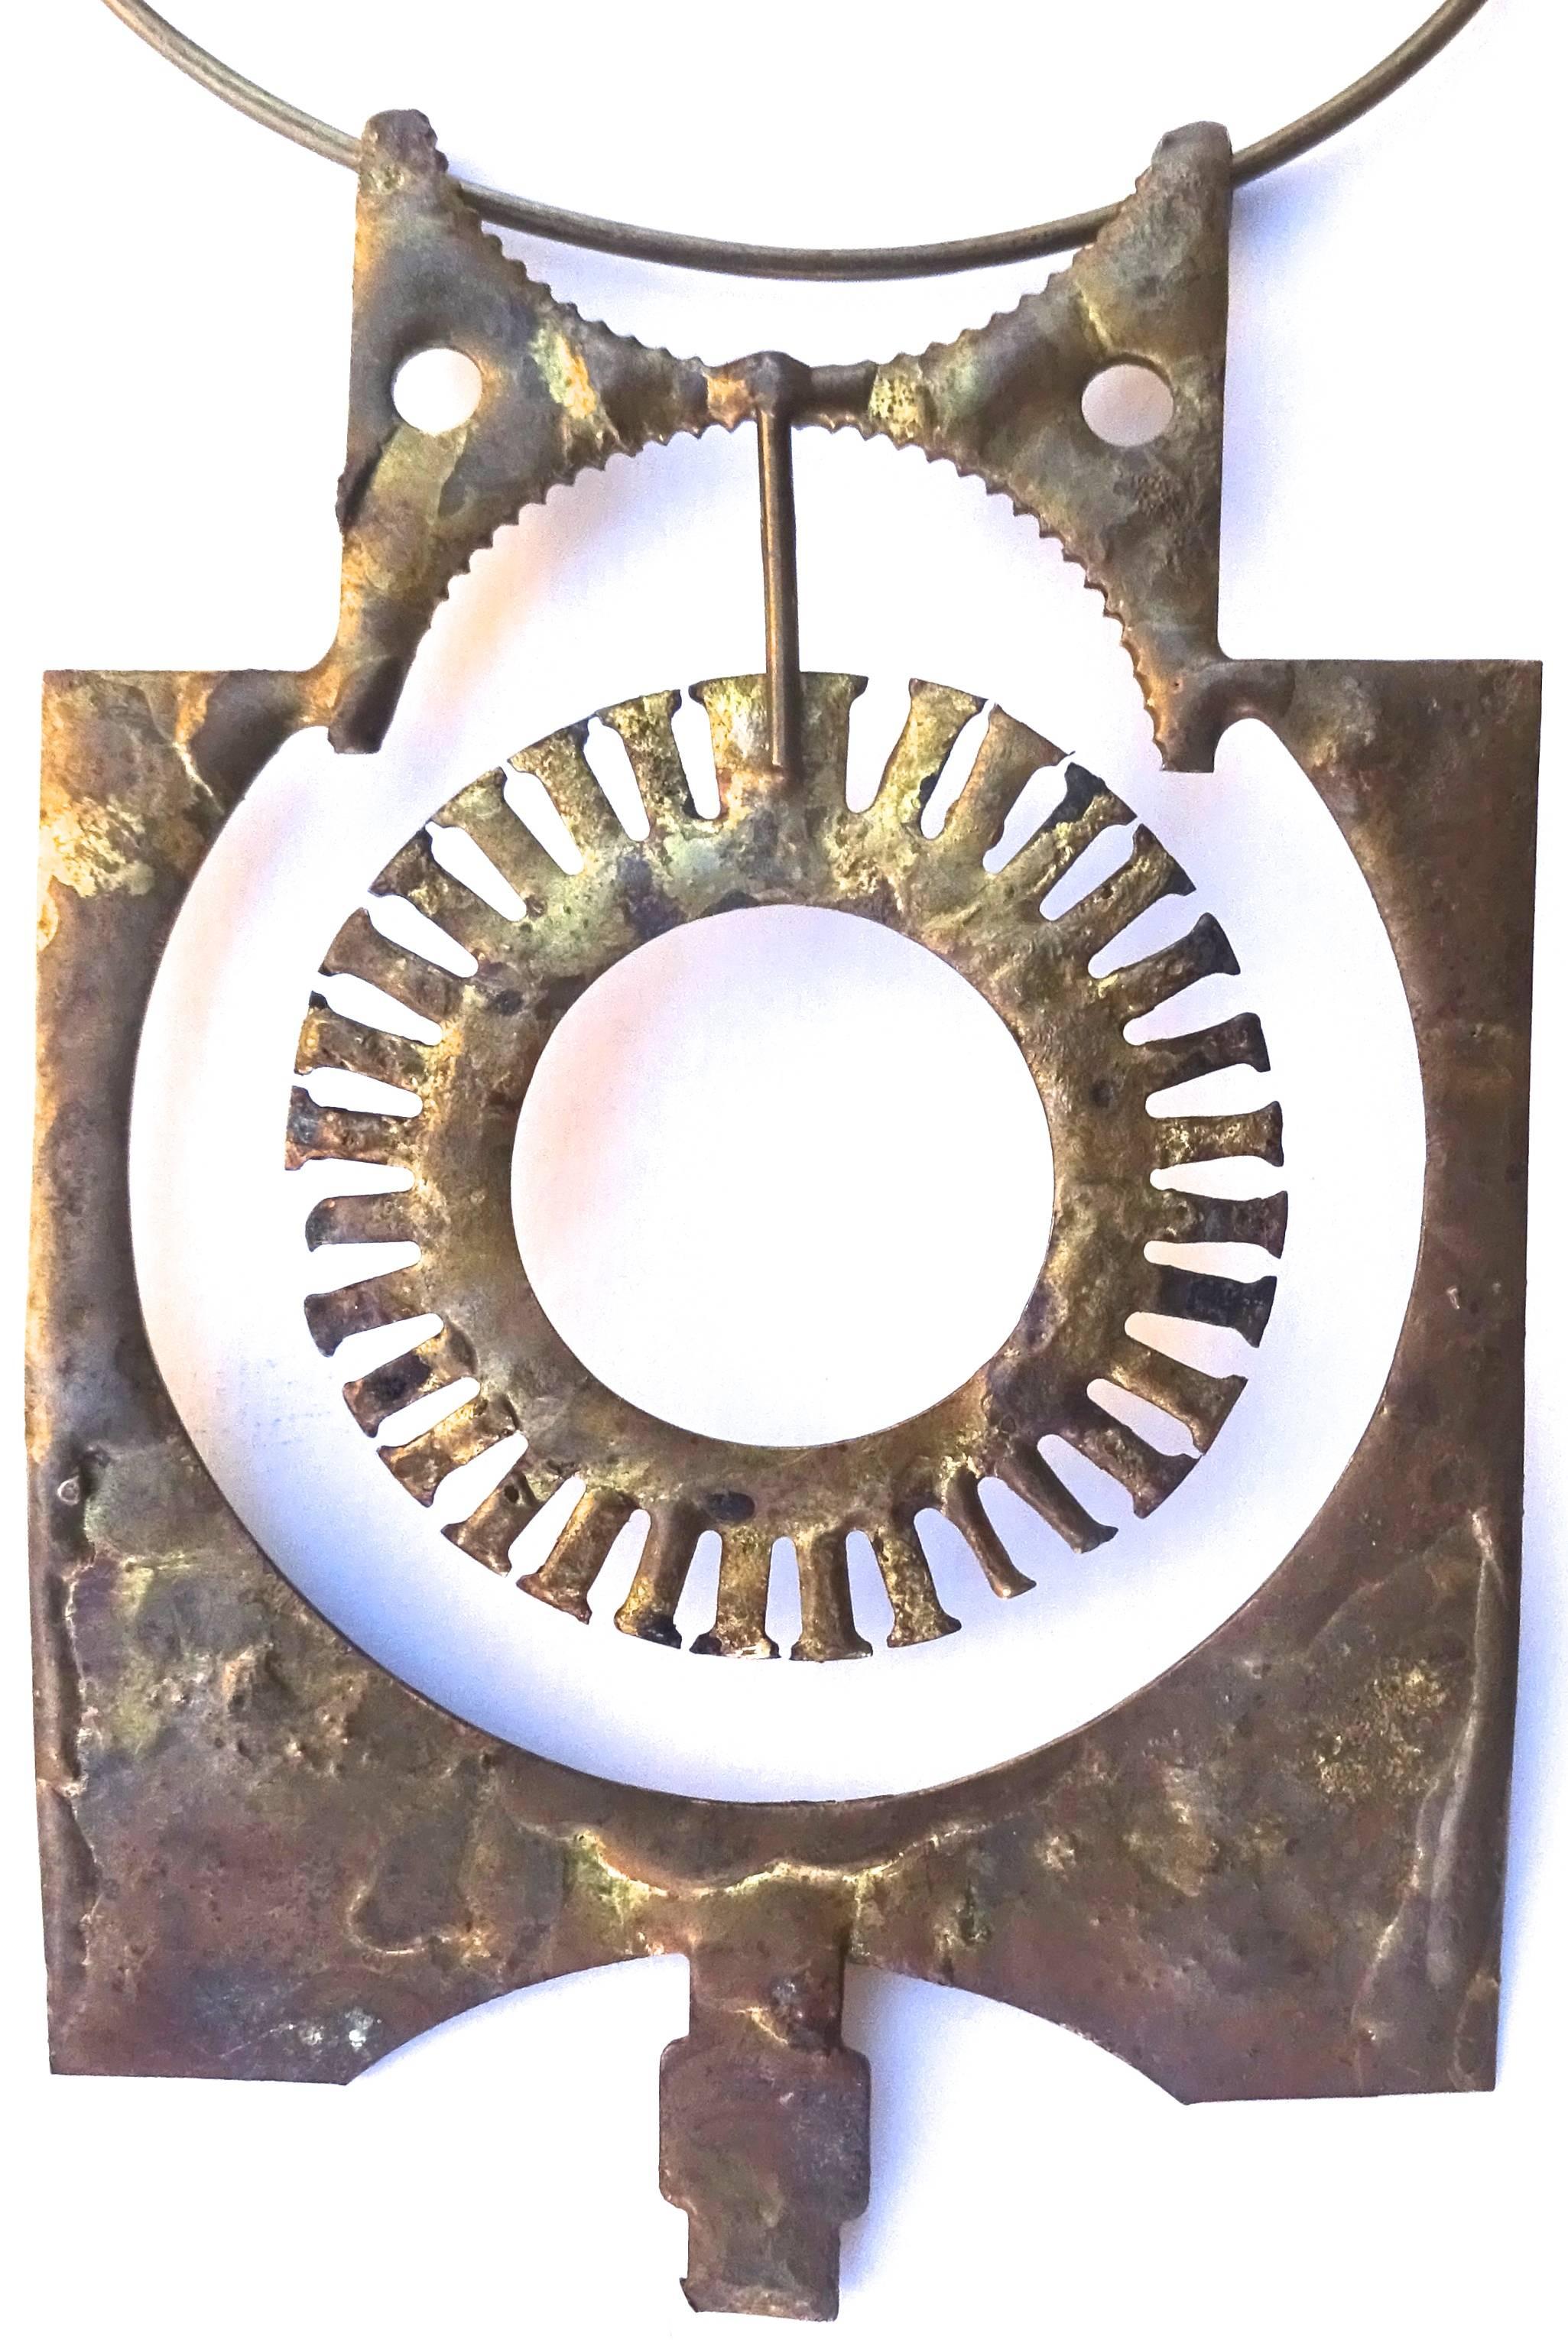 Large Brutalist 1970s hand-wrought studio brass pendant.

Overall dimensions with brass choker ring: 11